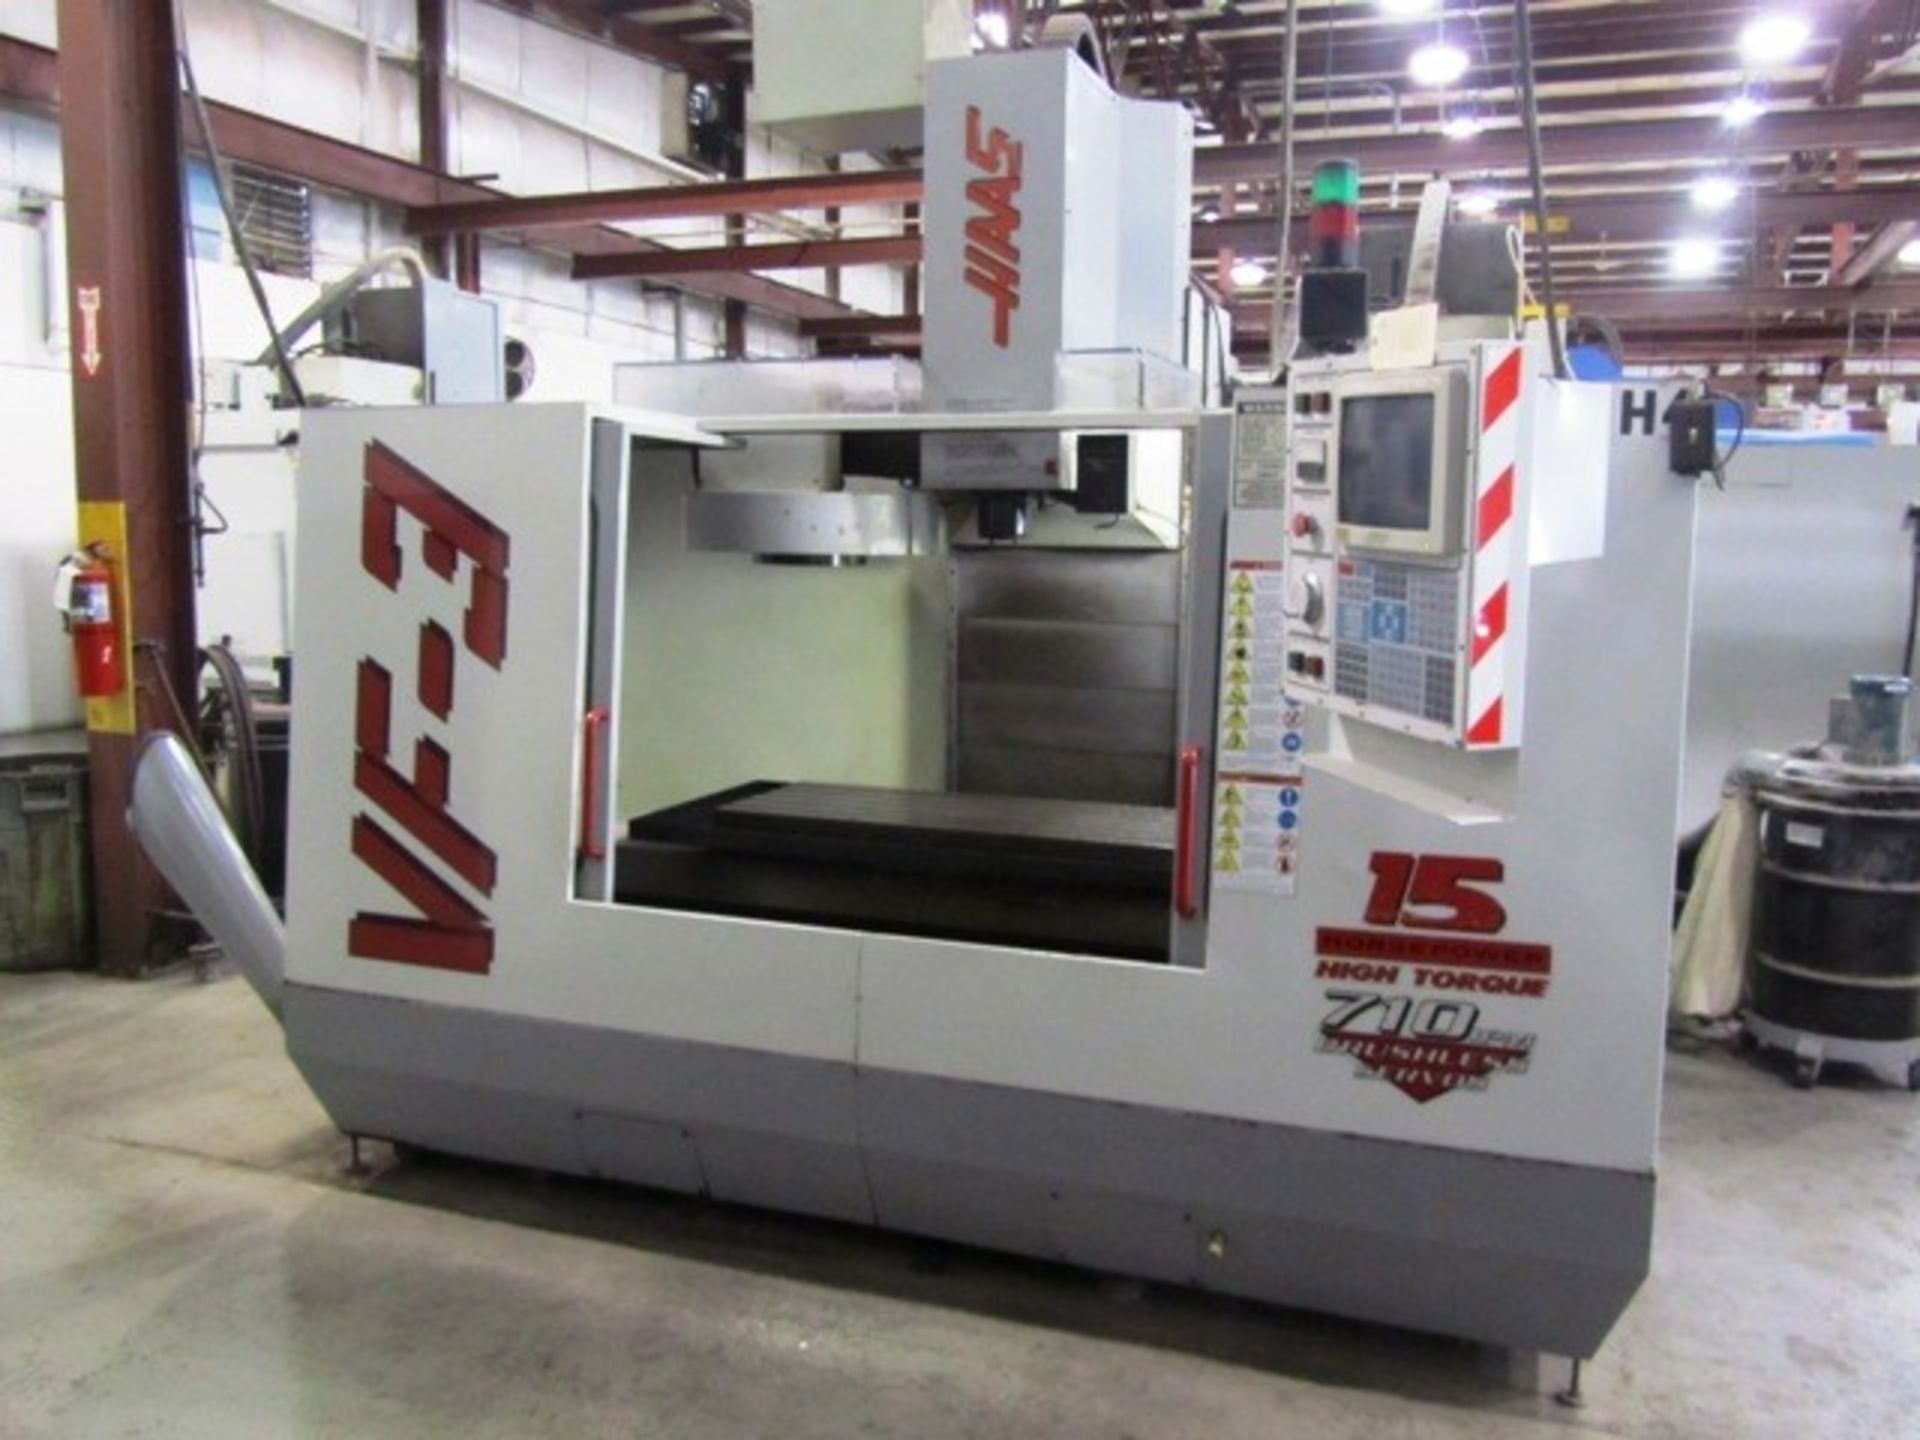 Haas VF3 CNC 4-Axis Vertical Machining Center with 48" x 18" Table, 40"-X, 20"-Y, 25"-Z-Axis - Image 3 of 4